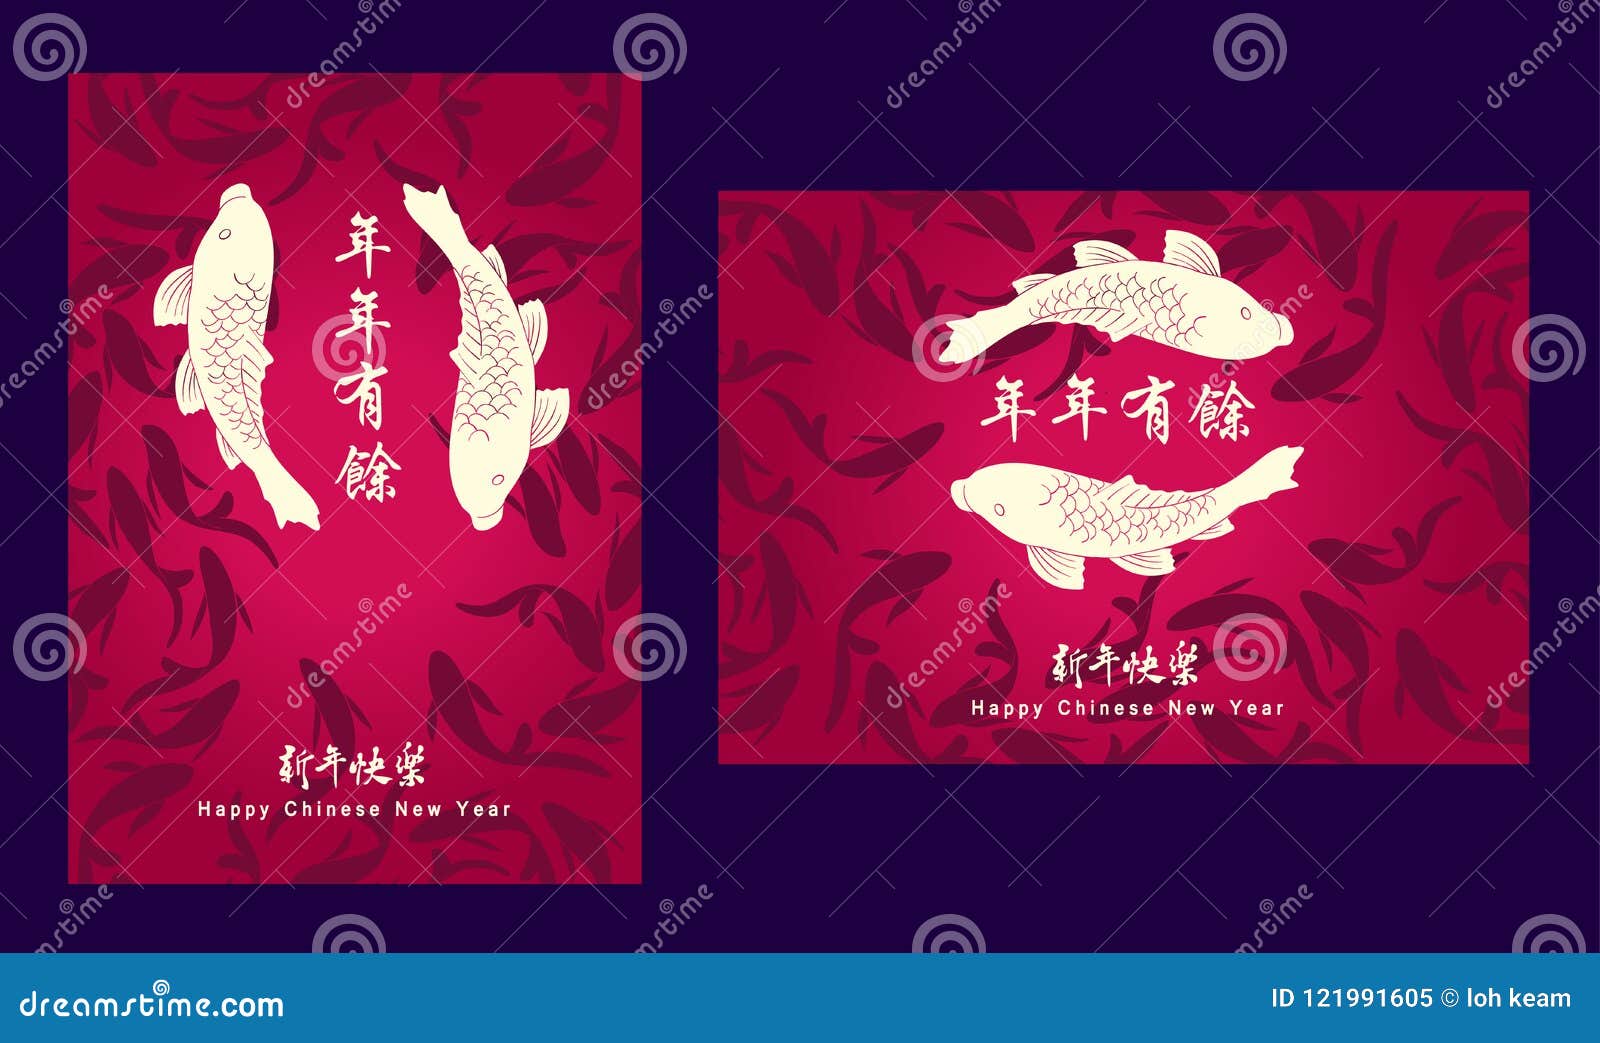 Happy Chinese New Year 2019 Year Of The Pig Nian Nian You Yu Mean May You Have A Prosperous New Year Xin Nian Kuai Le Mean Hap Stock Illustration Illustration